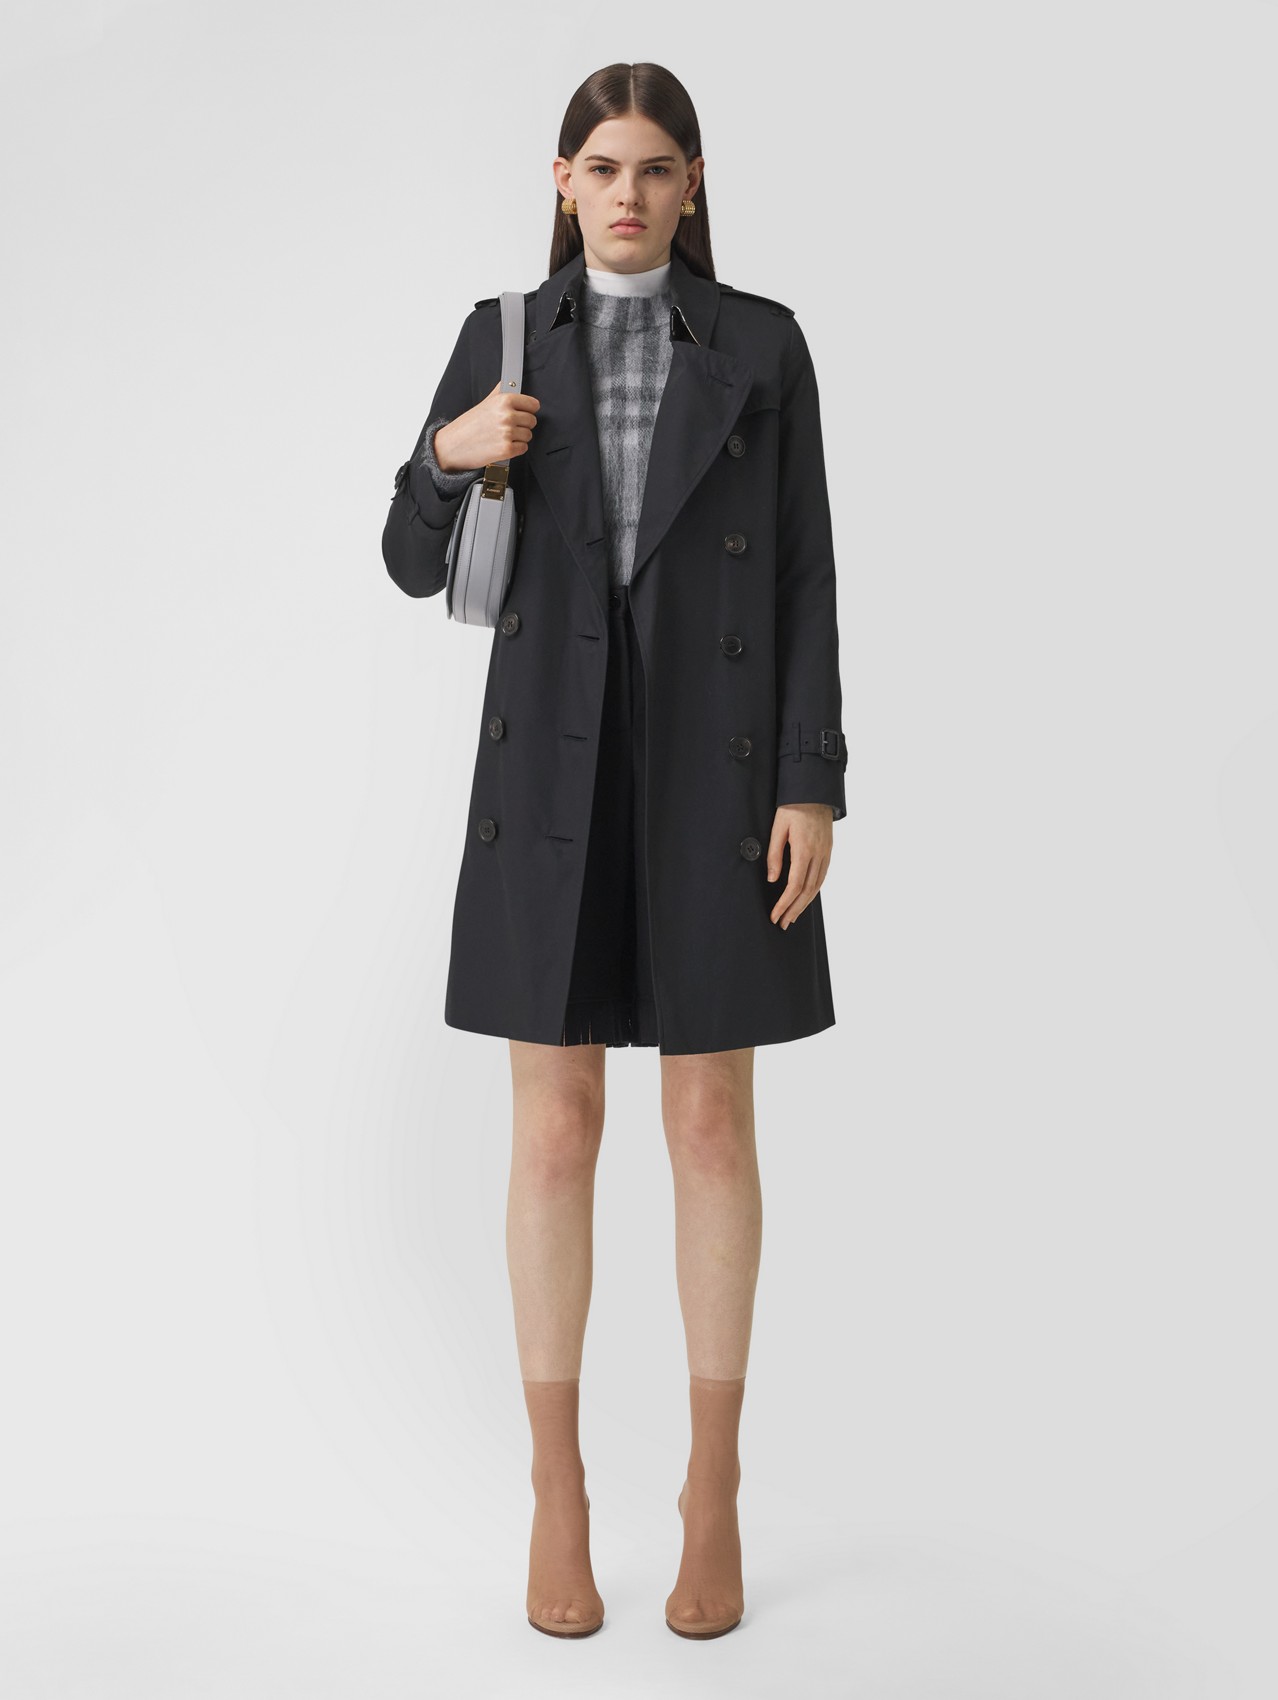 The Mid-length Kensington Heritage Trench Coat in Midnight